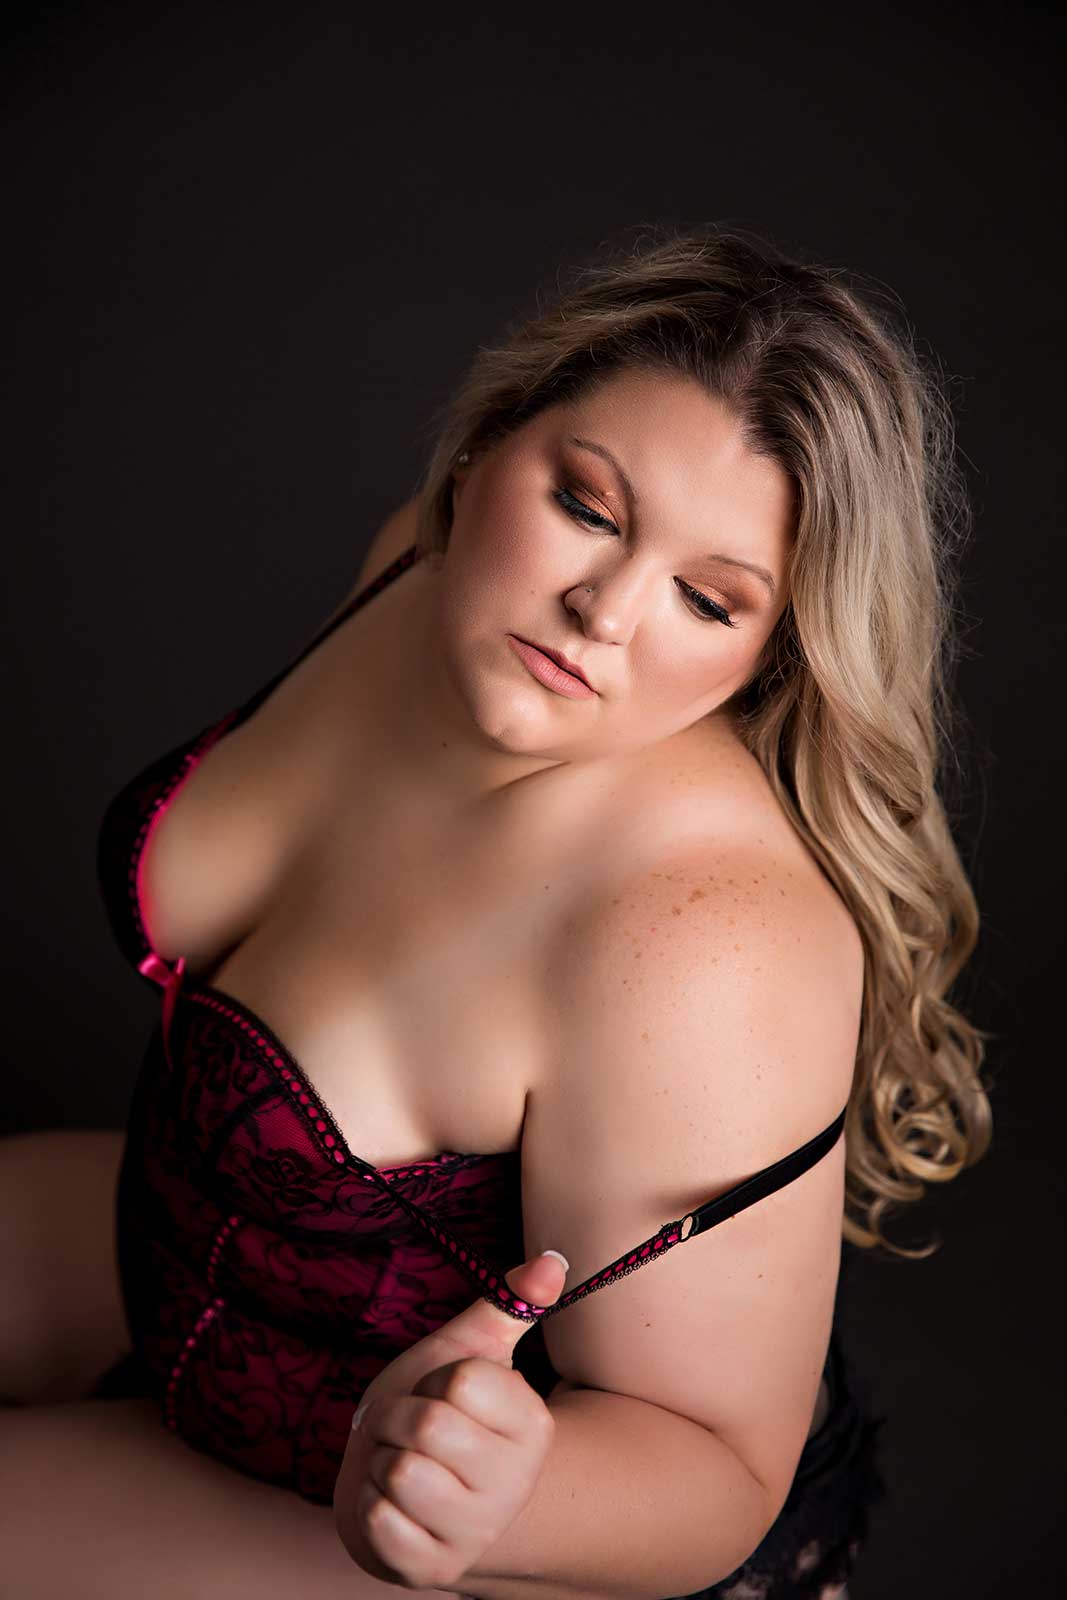 Woman in corset on black background boudoir session